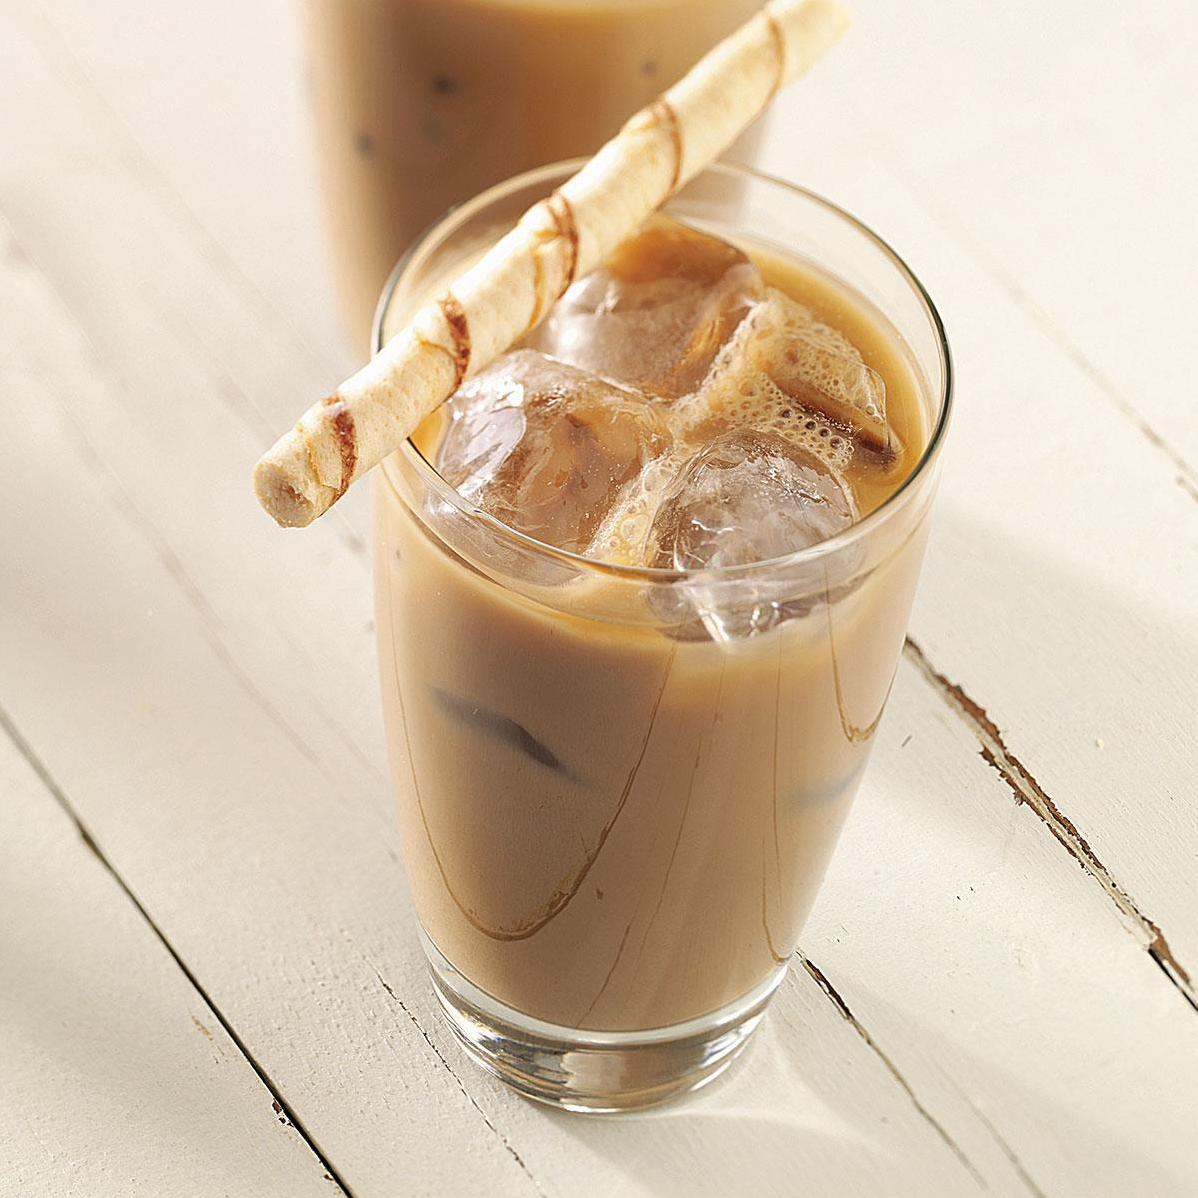  Sip into summer with this delicious iced coffee treat